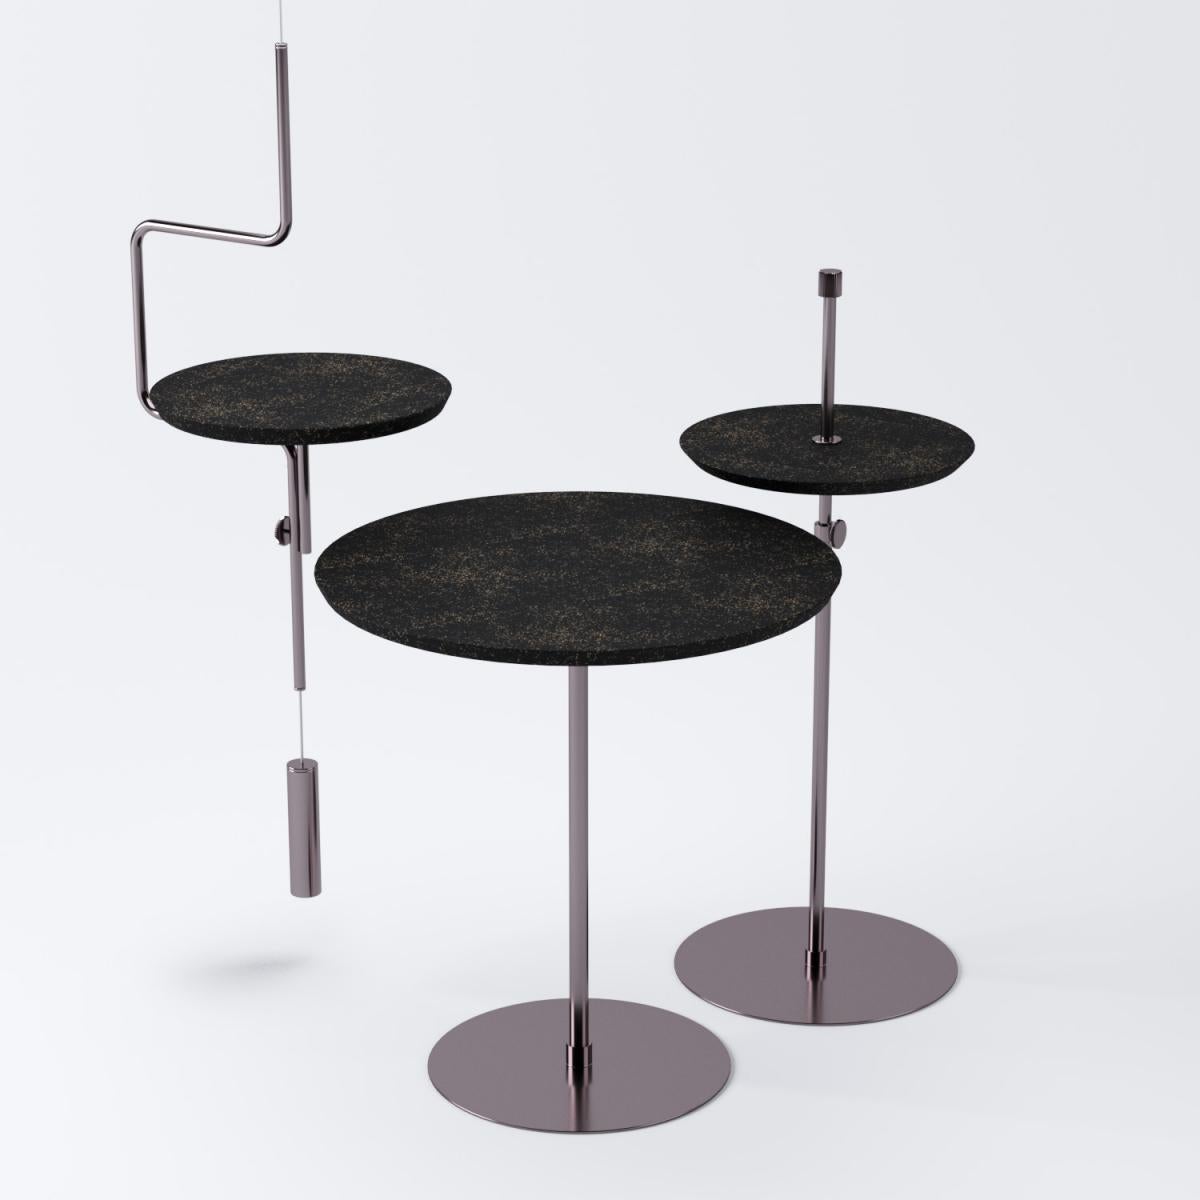 Brazilian Disco Hanging Table Onix and Rubberized Black Cork by decarvalho atelier For Sale